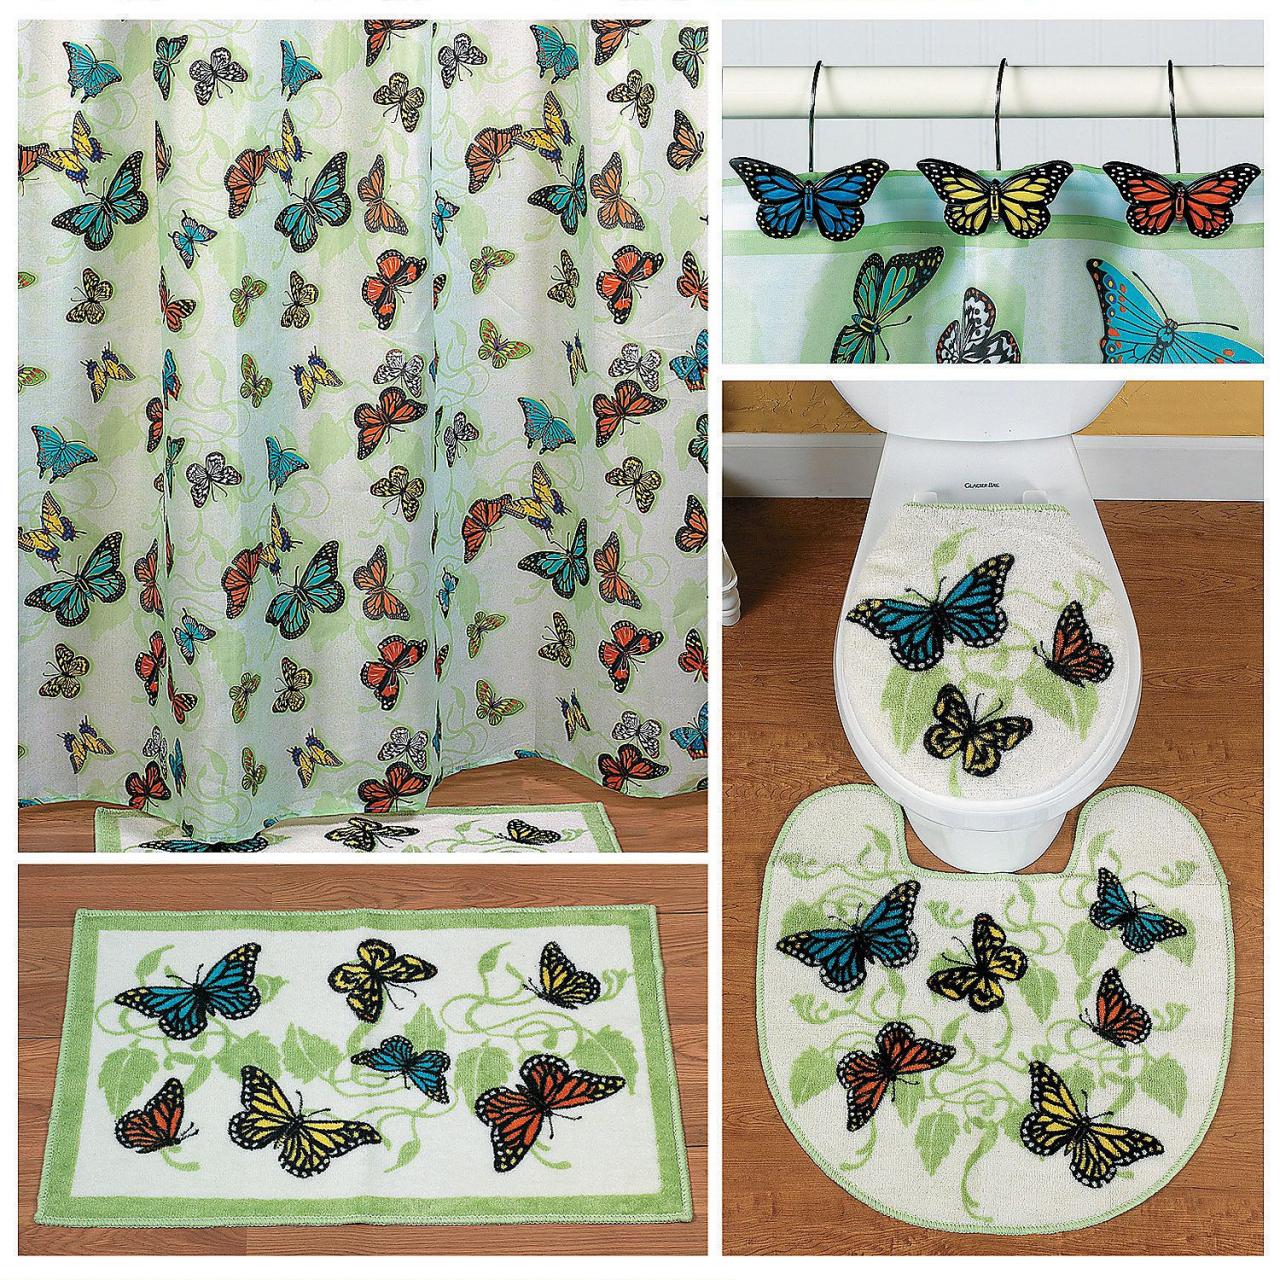 Awesome Butterfly Bathroom Sets Best Home Design